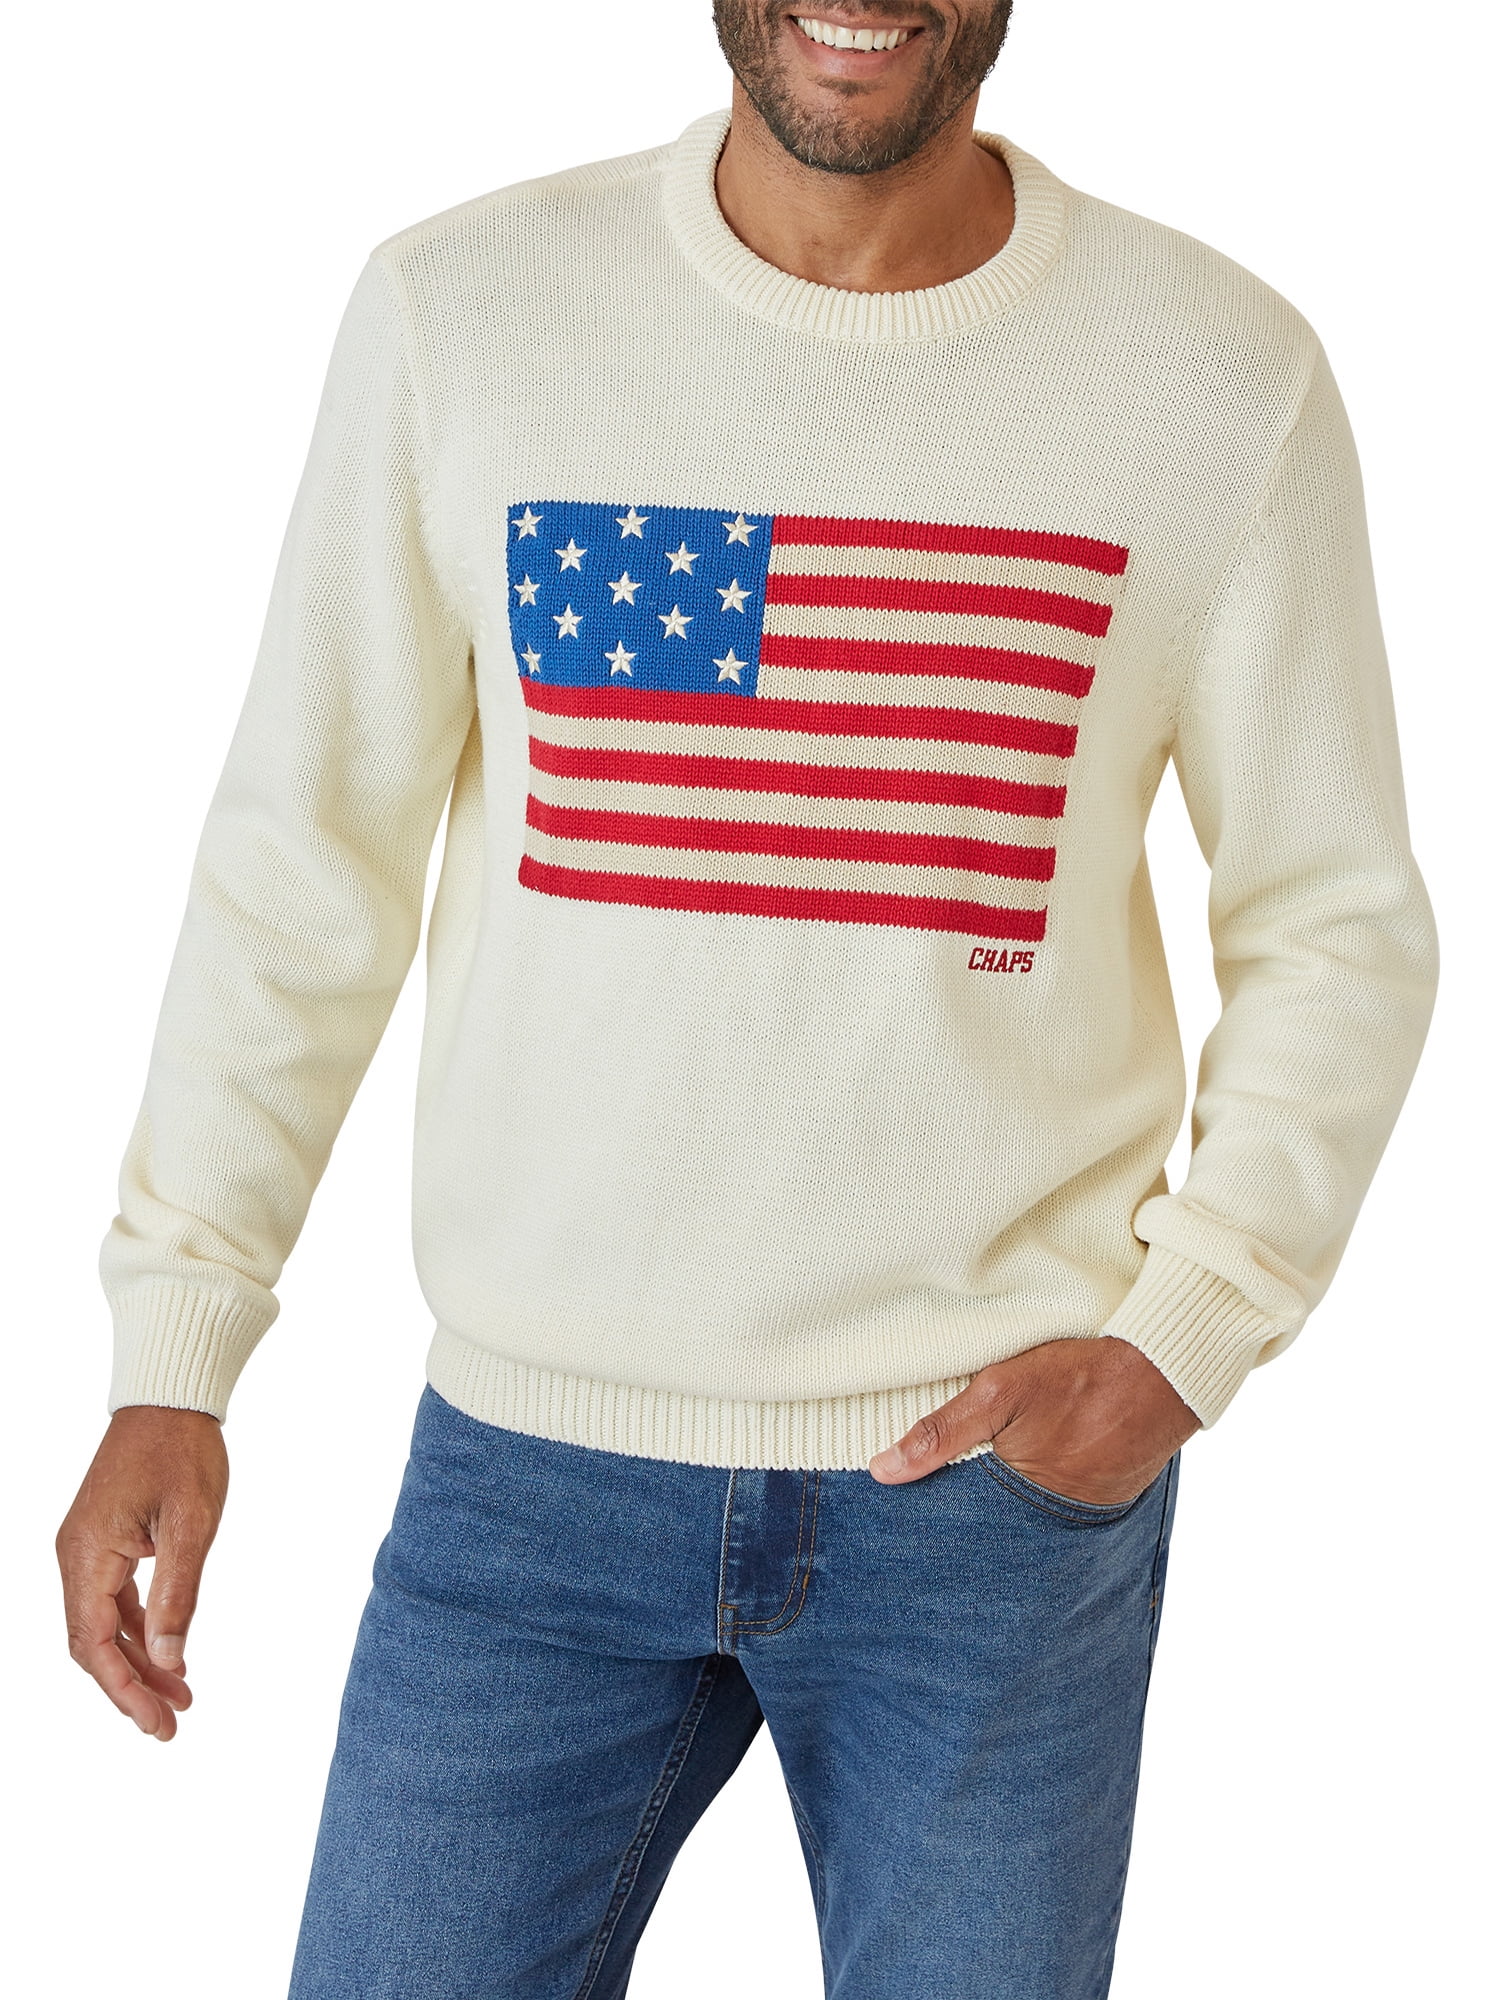 Chaps Men's Cotton Iconic Flag Sweater-Sizes XS up to 4XB 